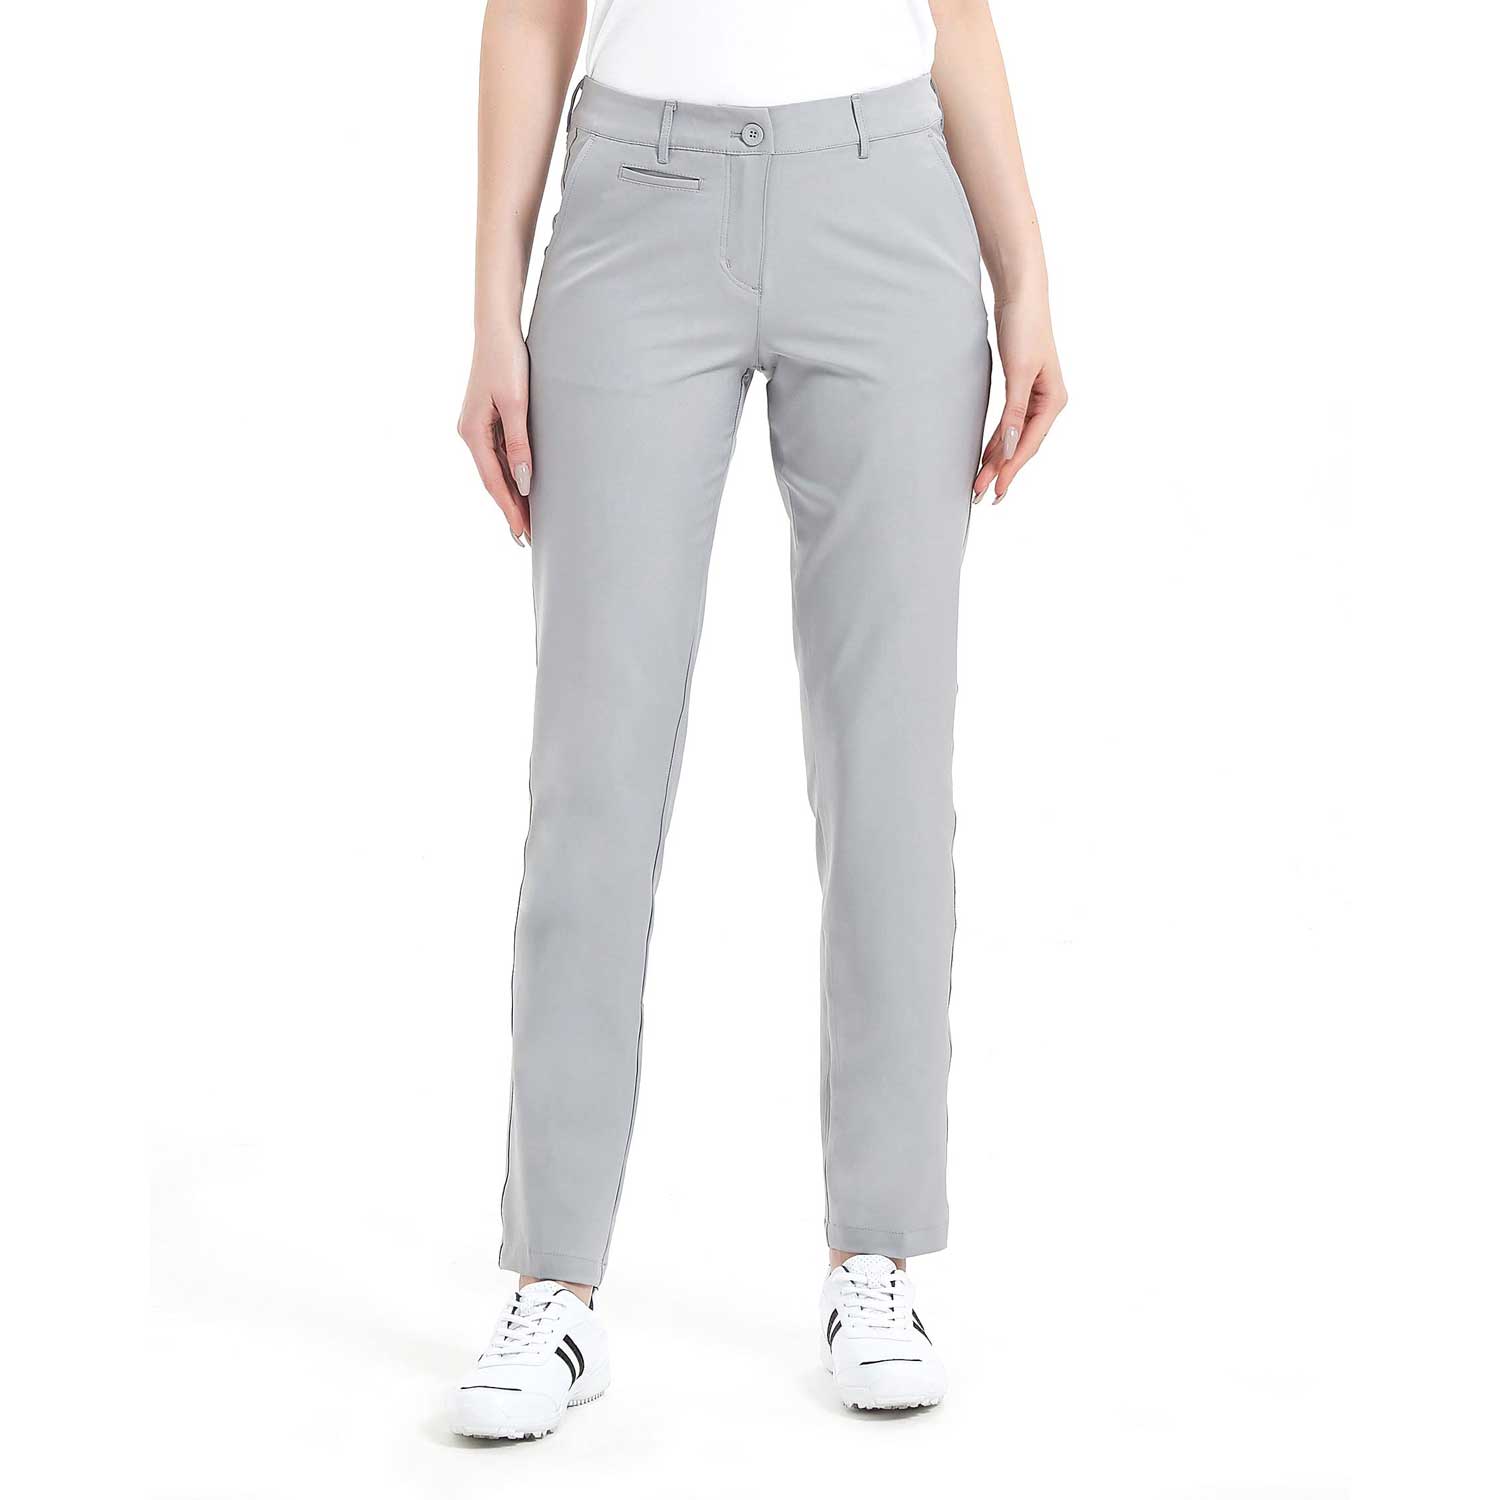 CLEARANCE JoFit Ladies Belted Cropped Golf Pants - Maui (Grey